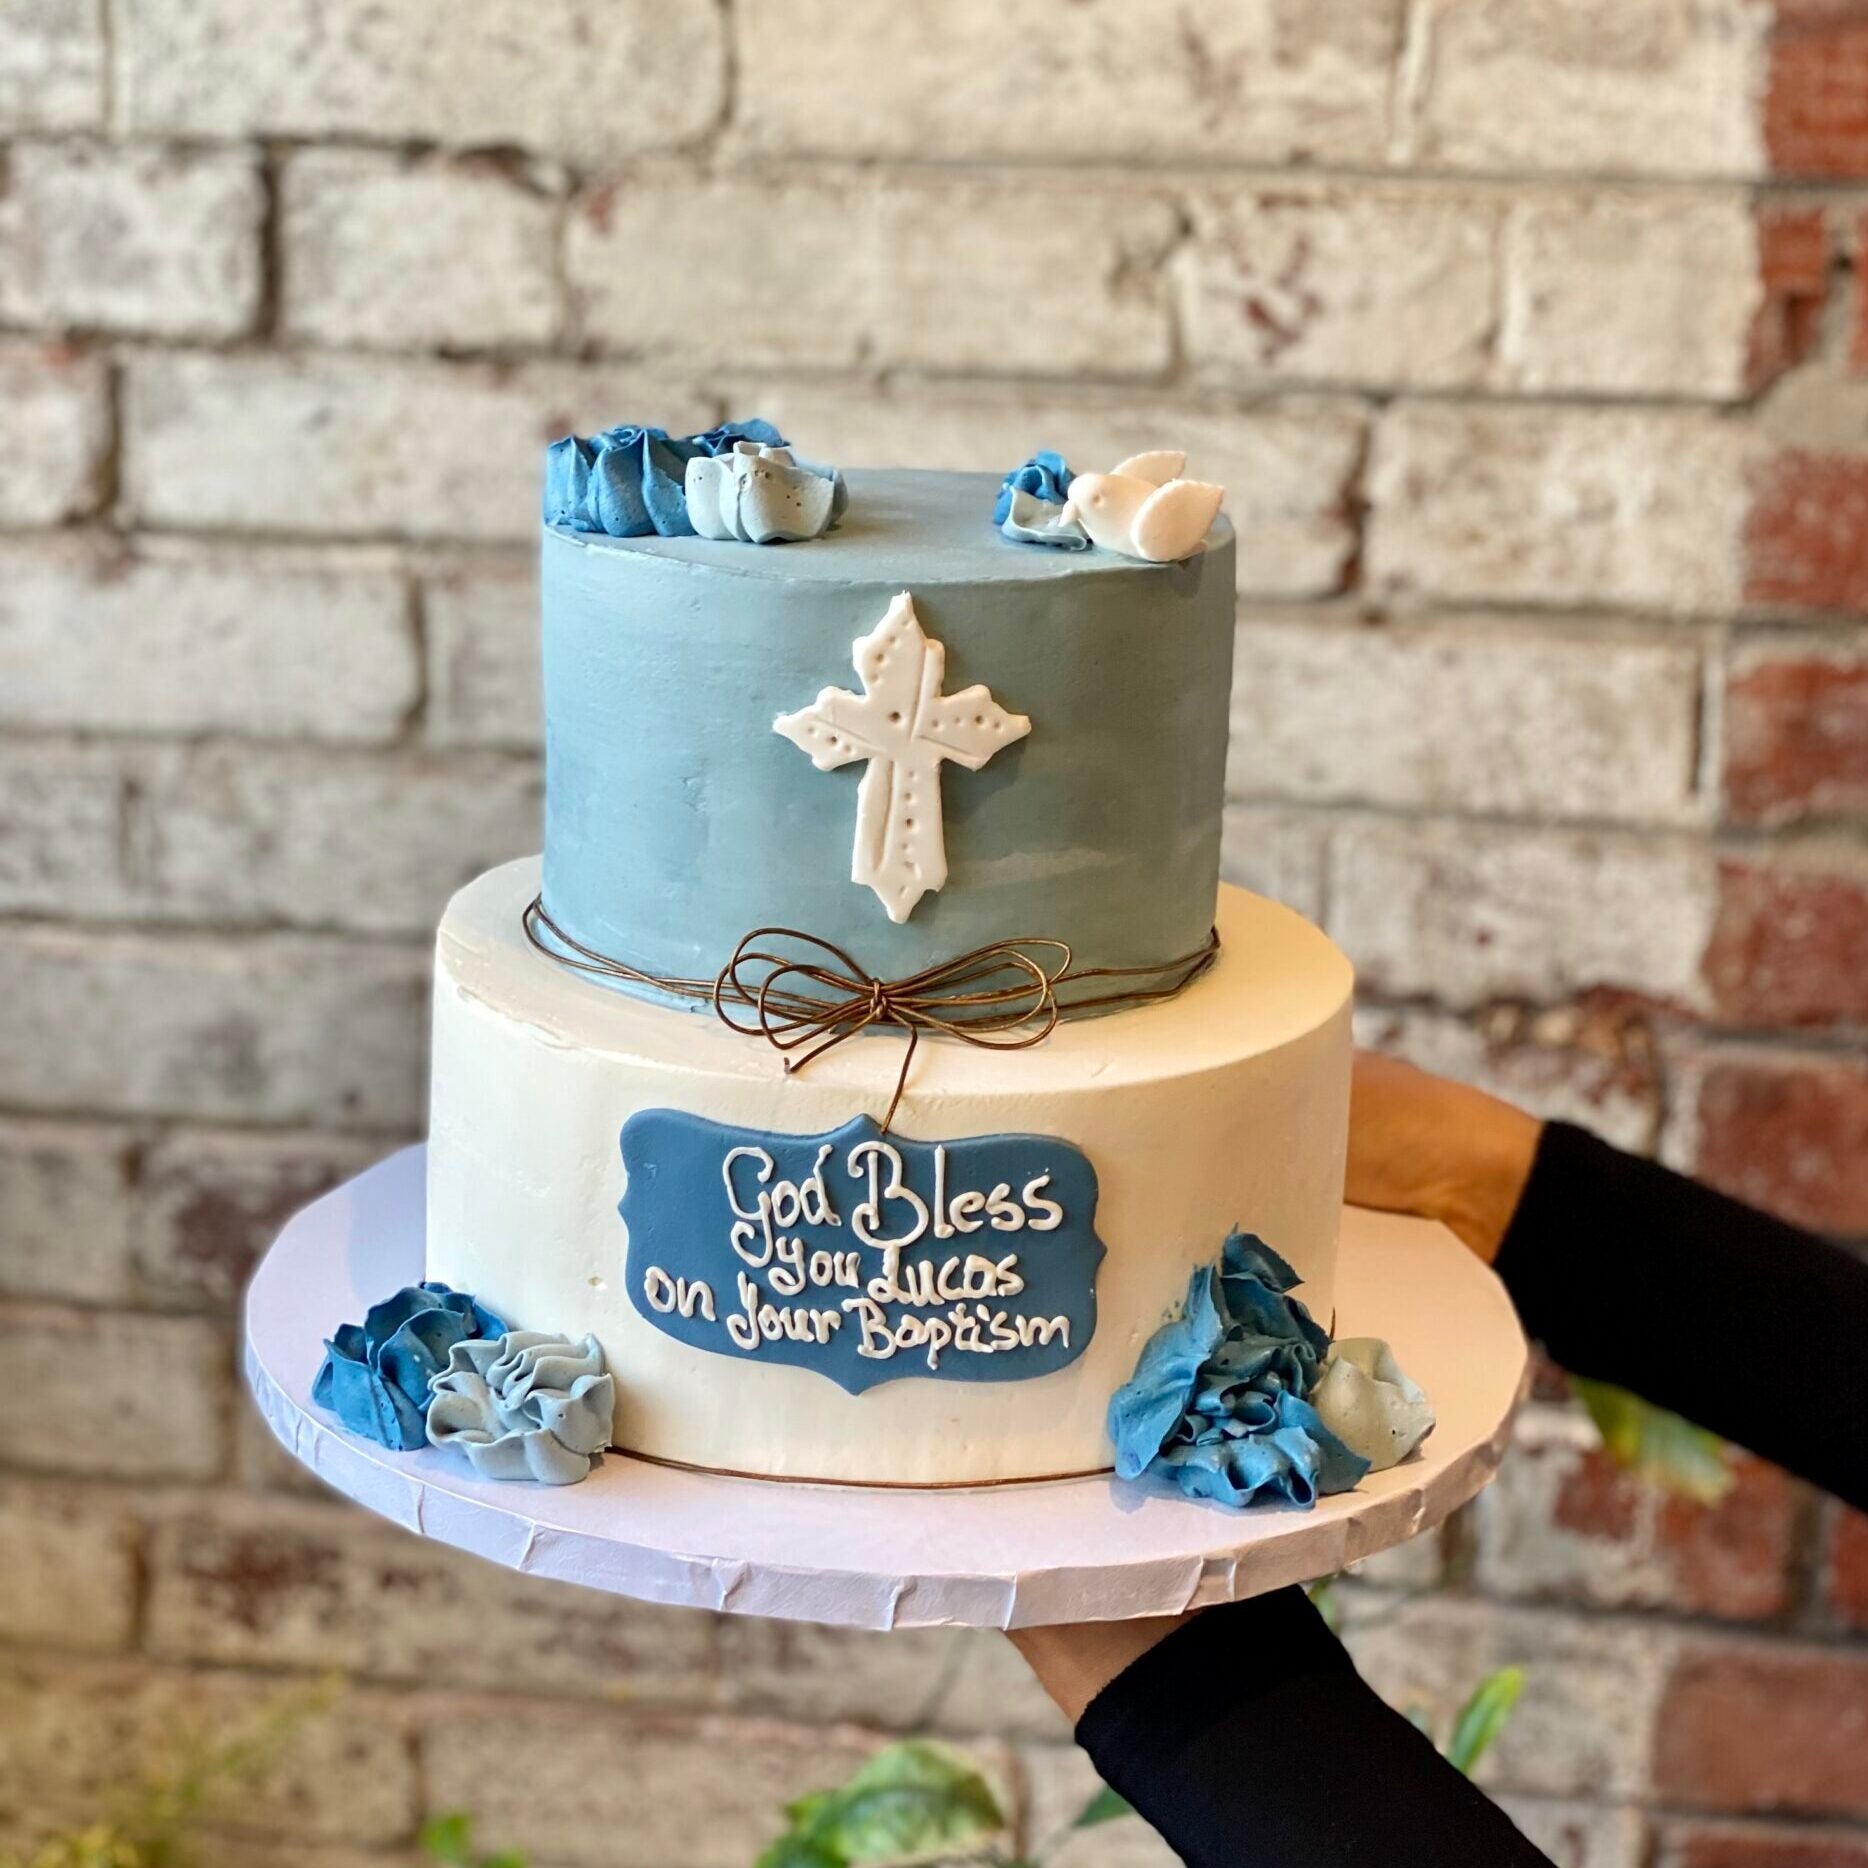 Two-tiered cake with religious theme